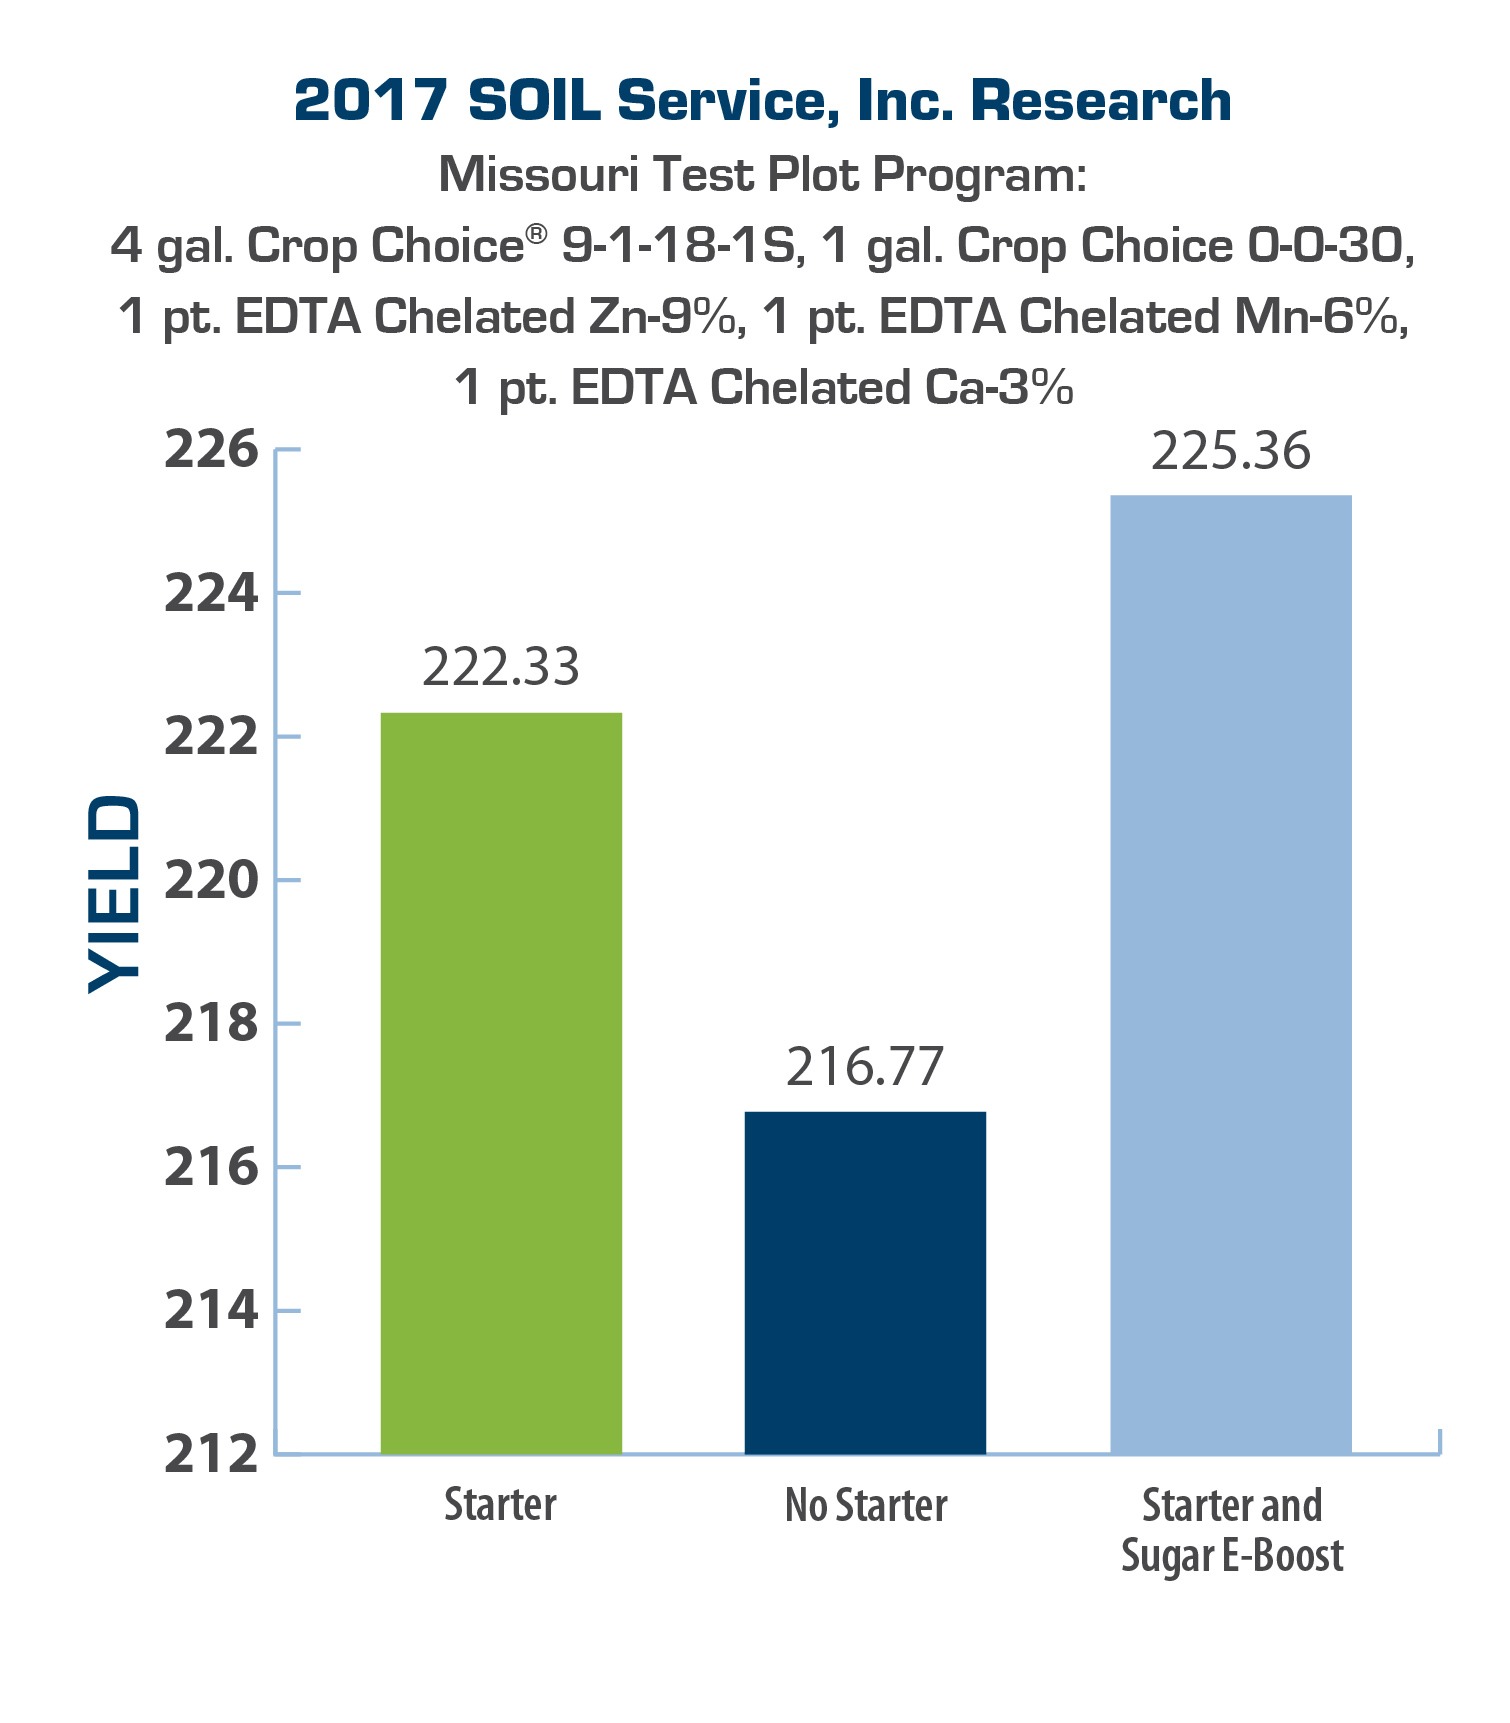 Bar chart displaying 2017 results for Crop Choice, Micronutrients, and Sugar E-Boost at Missouri test plot